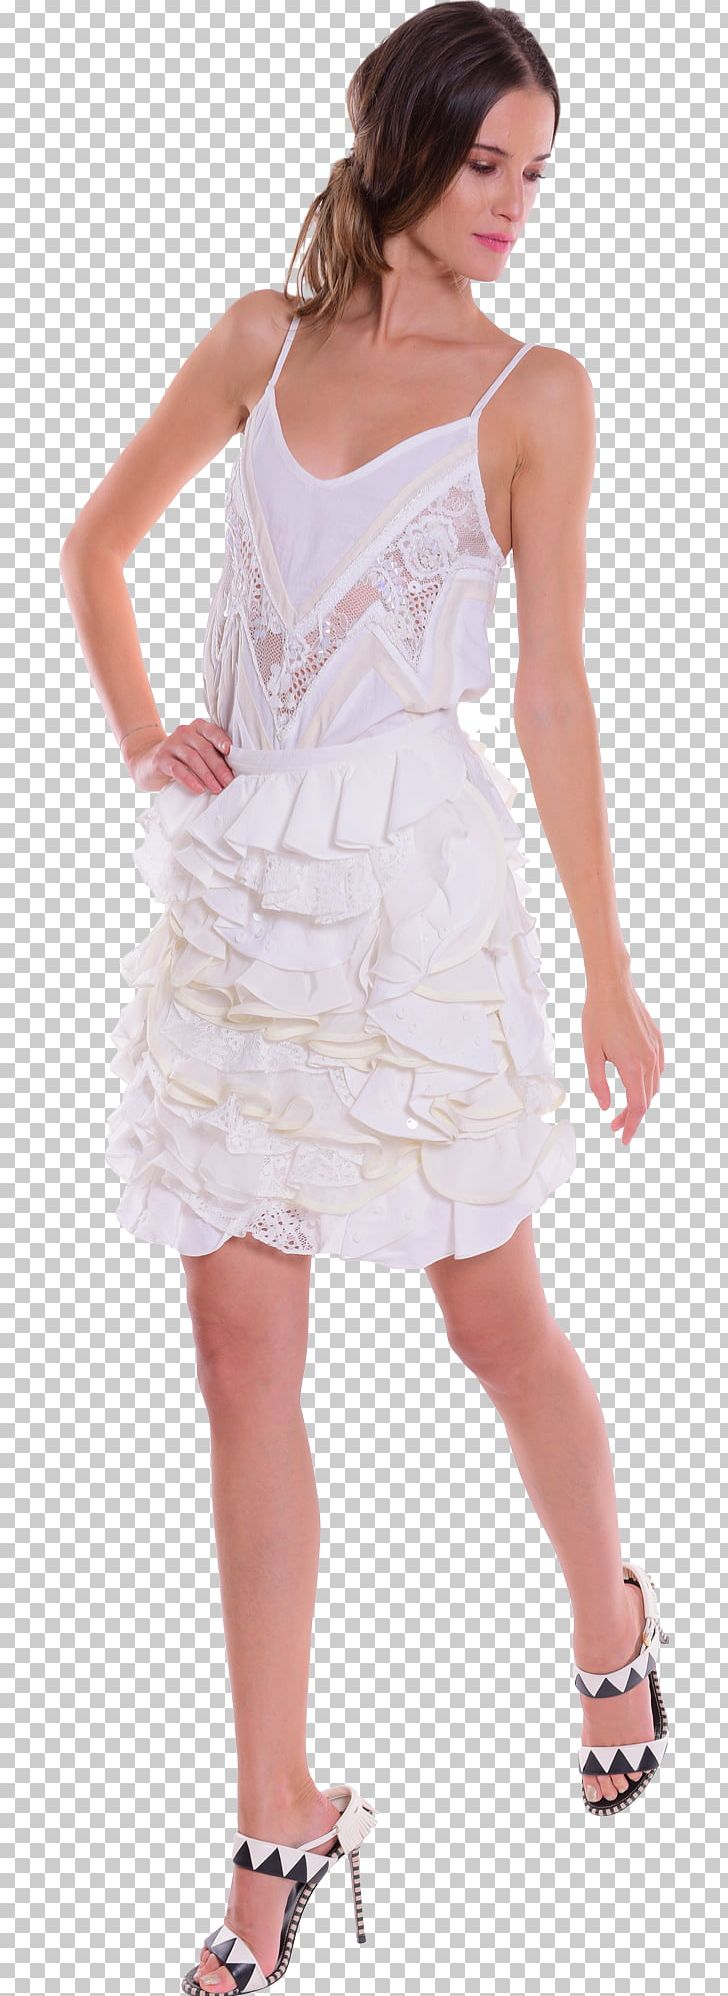 Cocktail Dress Ruffle Shoulder PNG, Clipart, Clothing, Cocktail ...